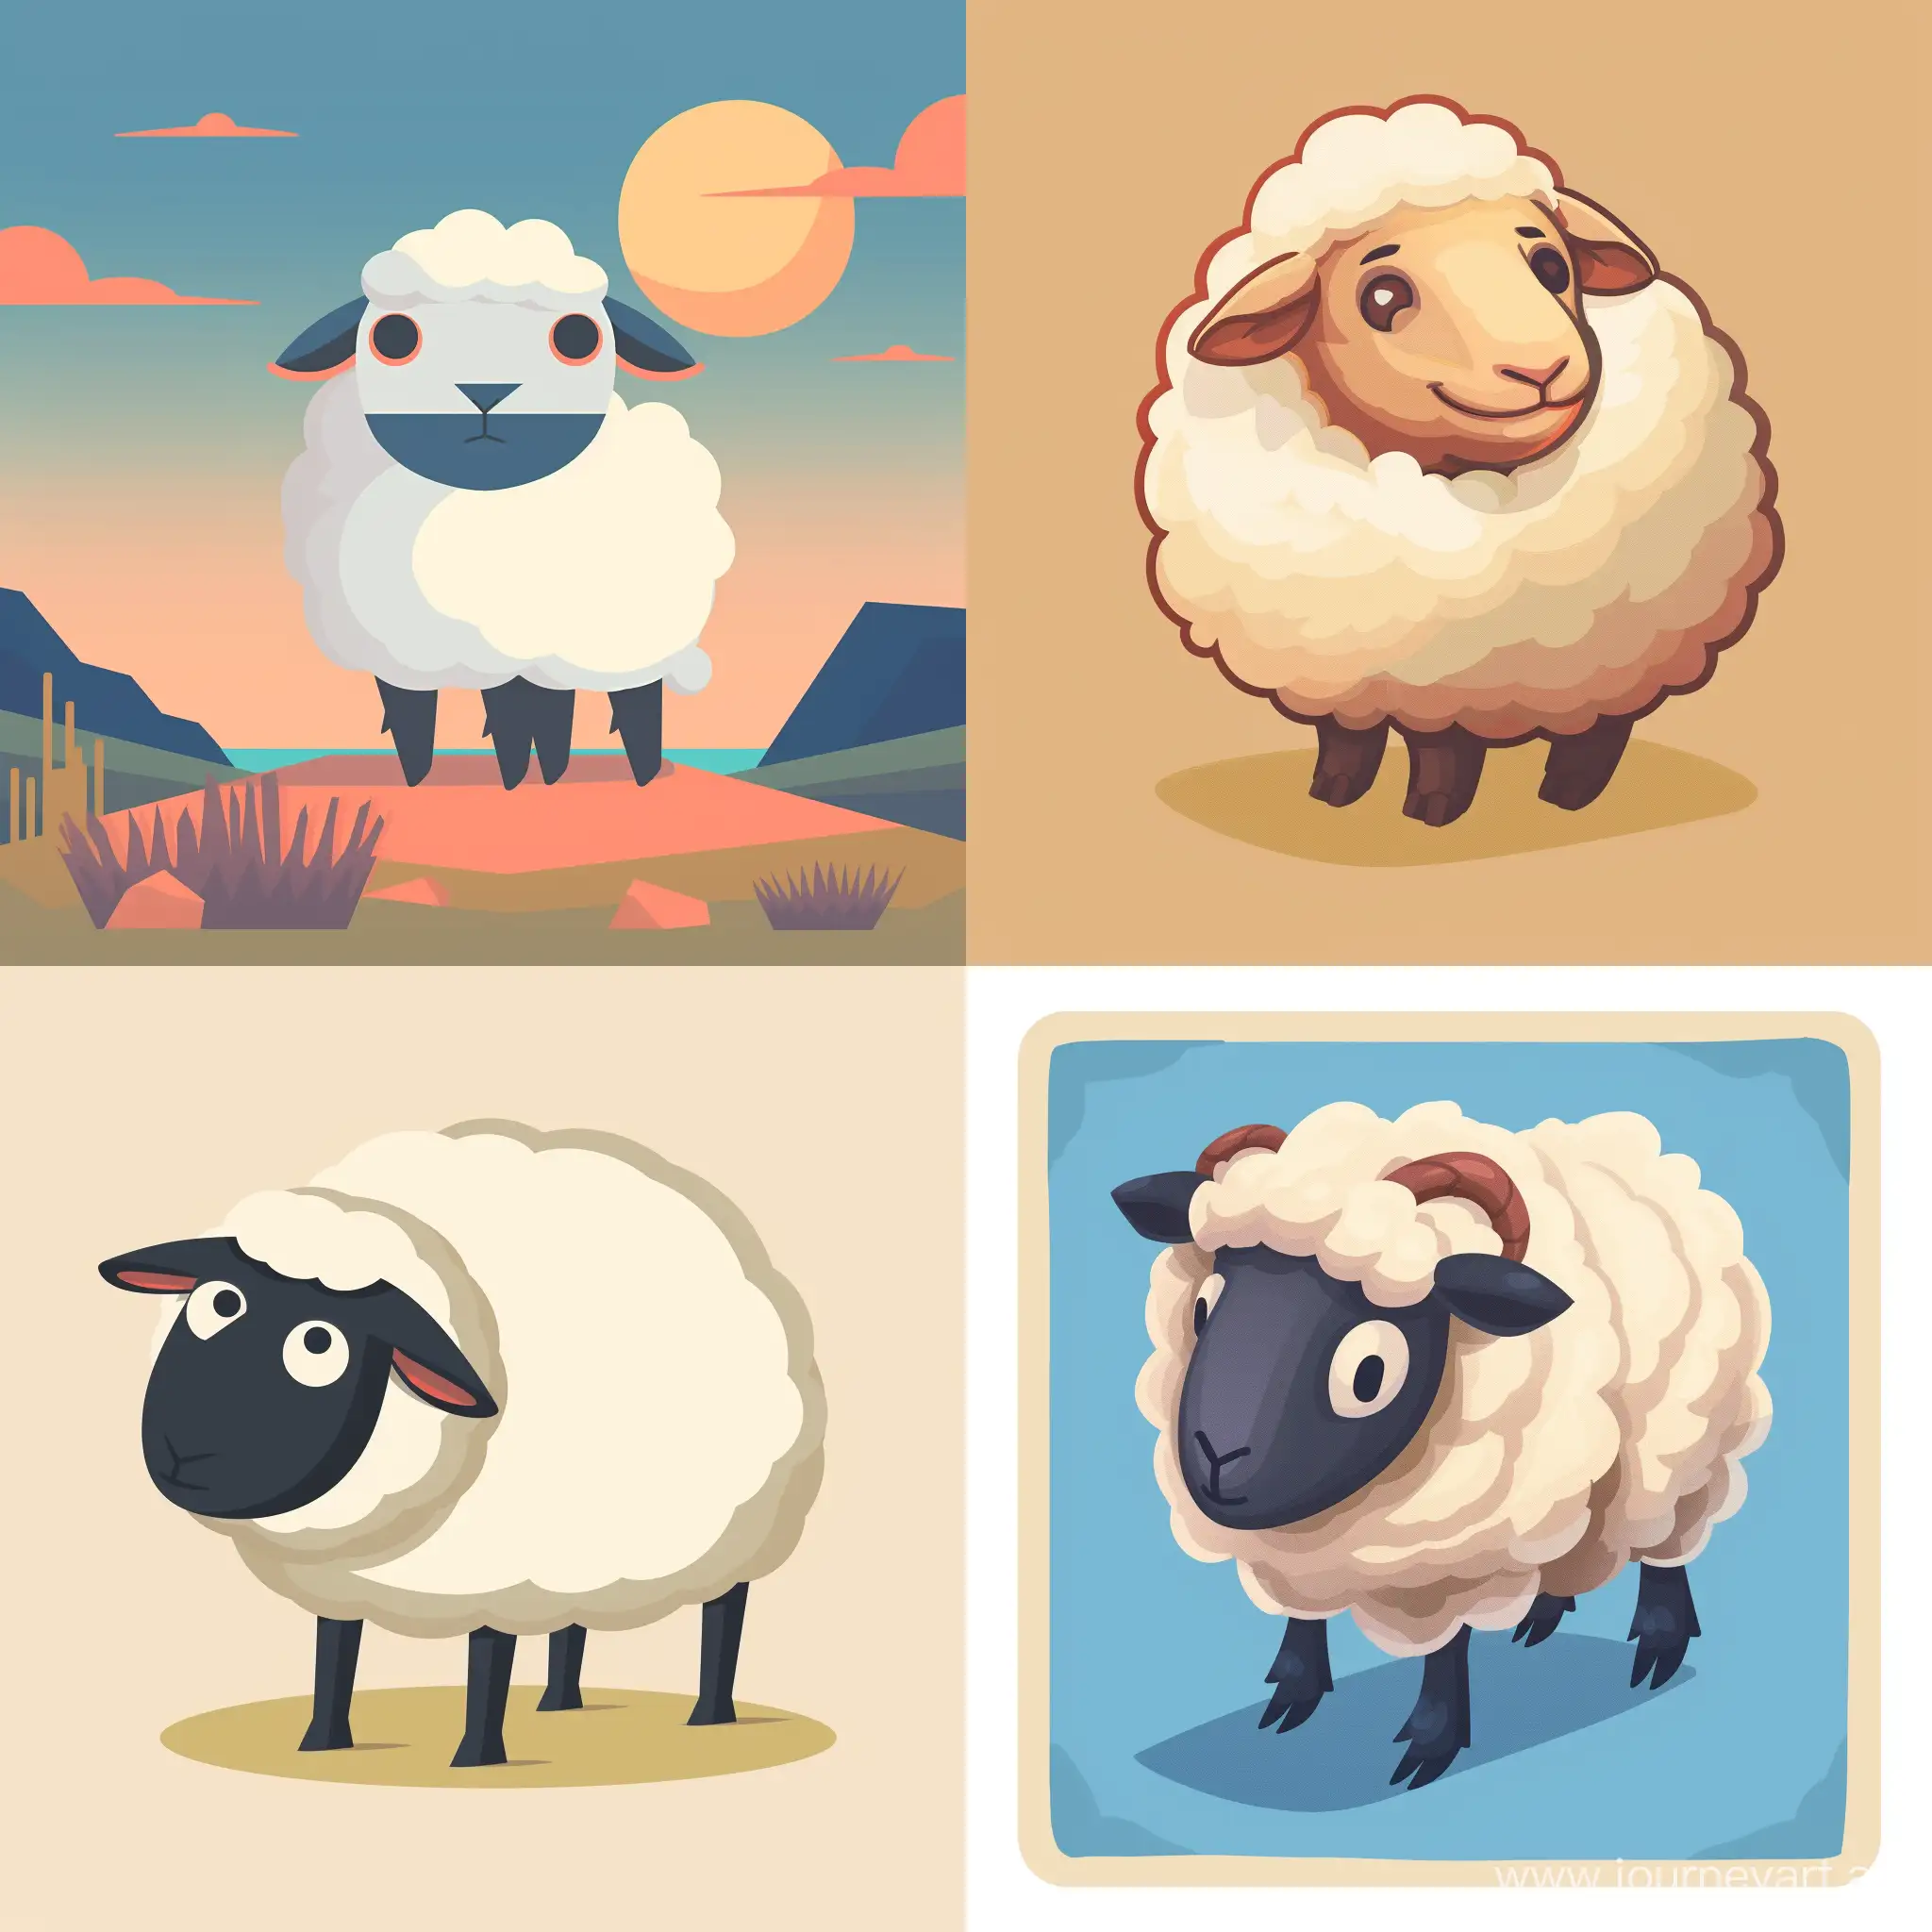 Design a card. Completely minimal and encrypted. The card represents a sheep. The card is designed for a game. Do not have any font or text